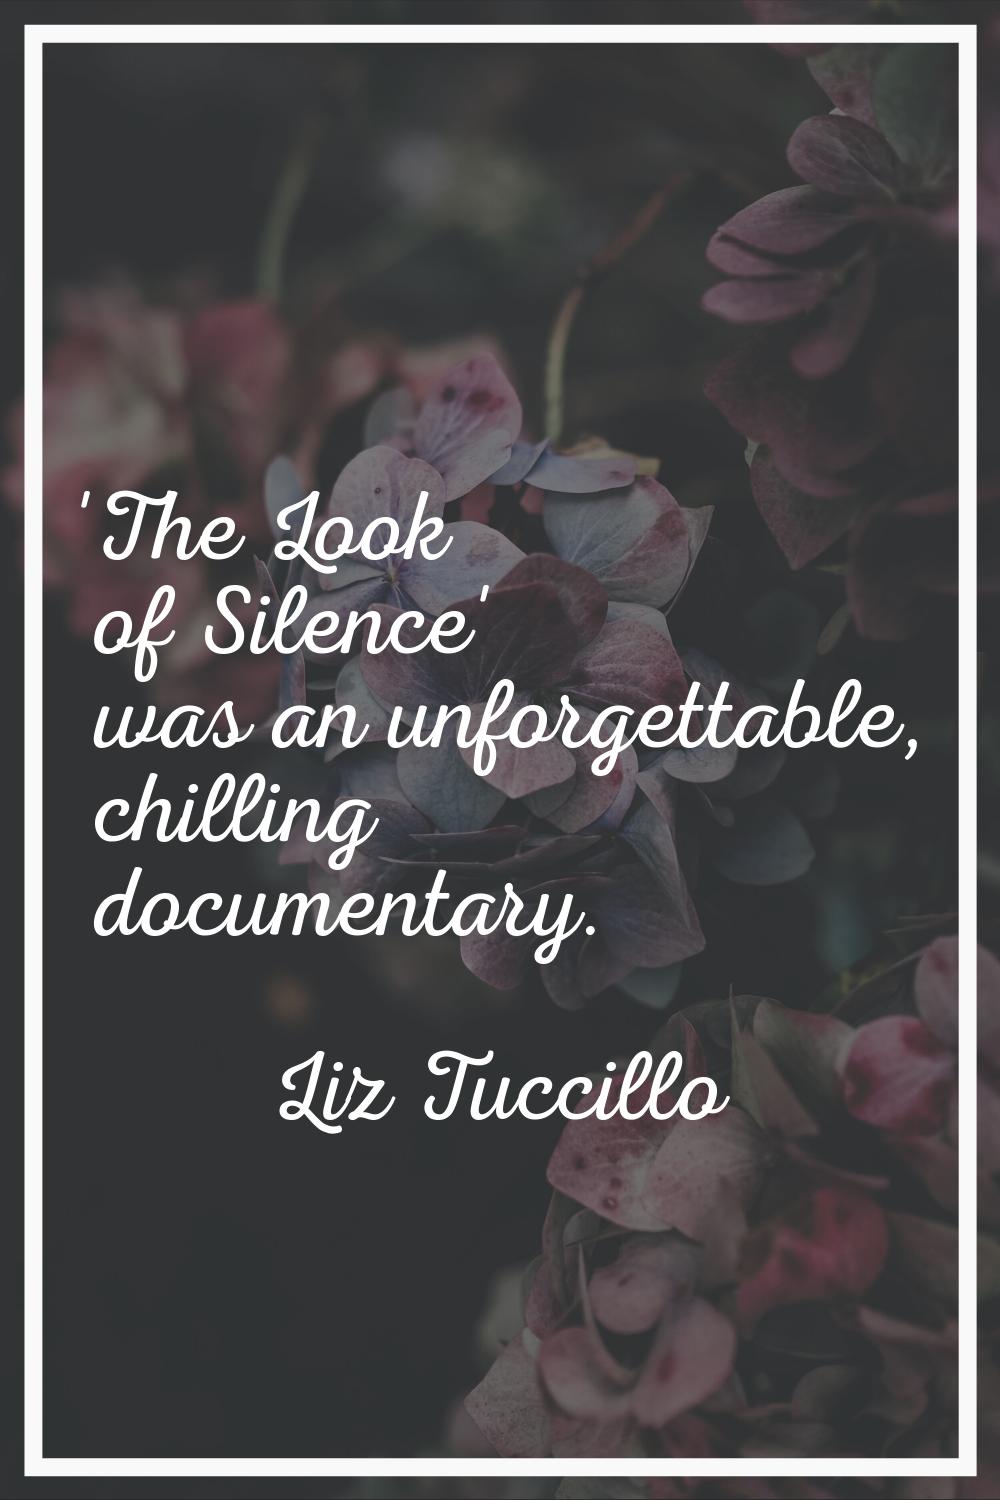 'The Look of Silence' was an unforgettable, chilling documentary.